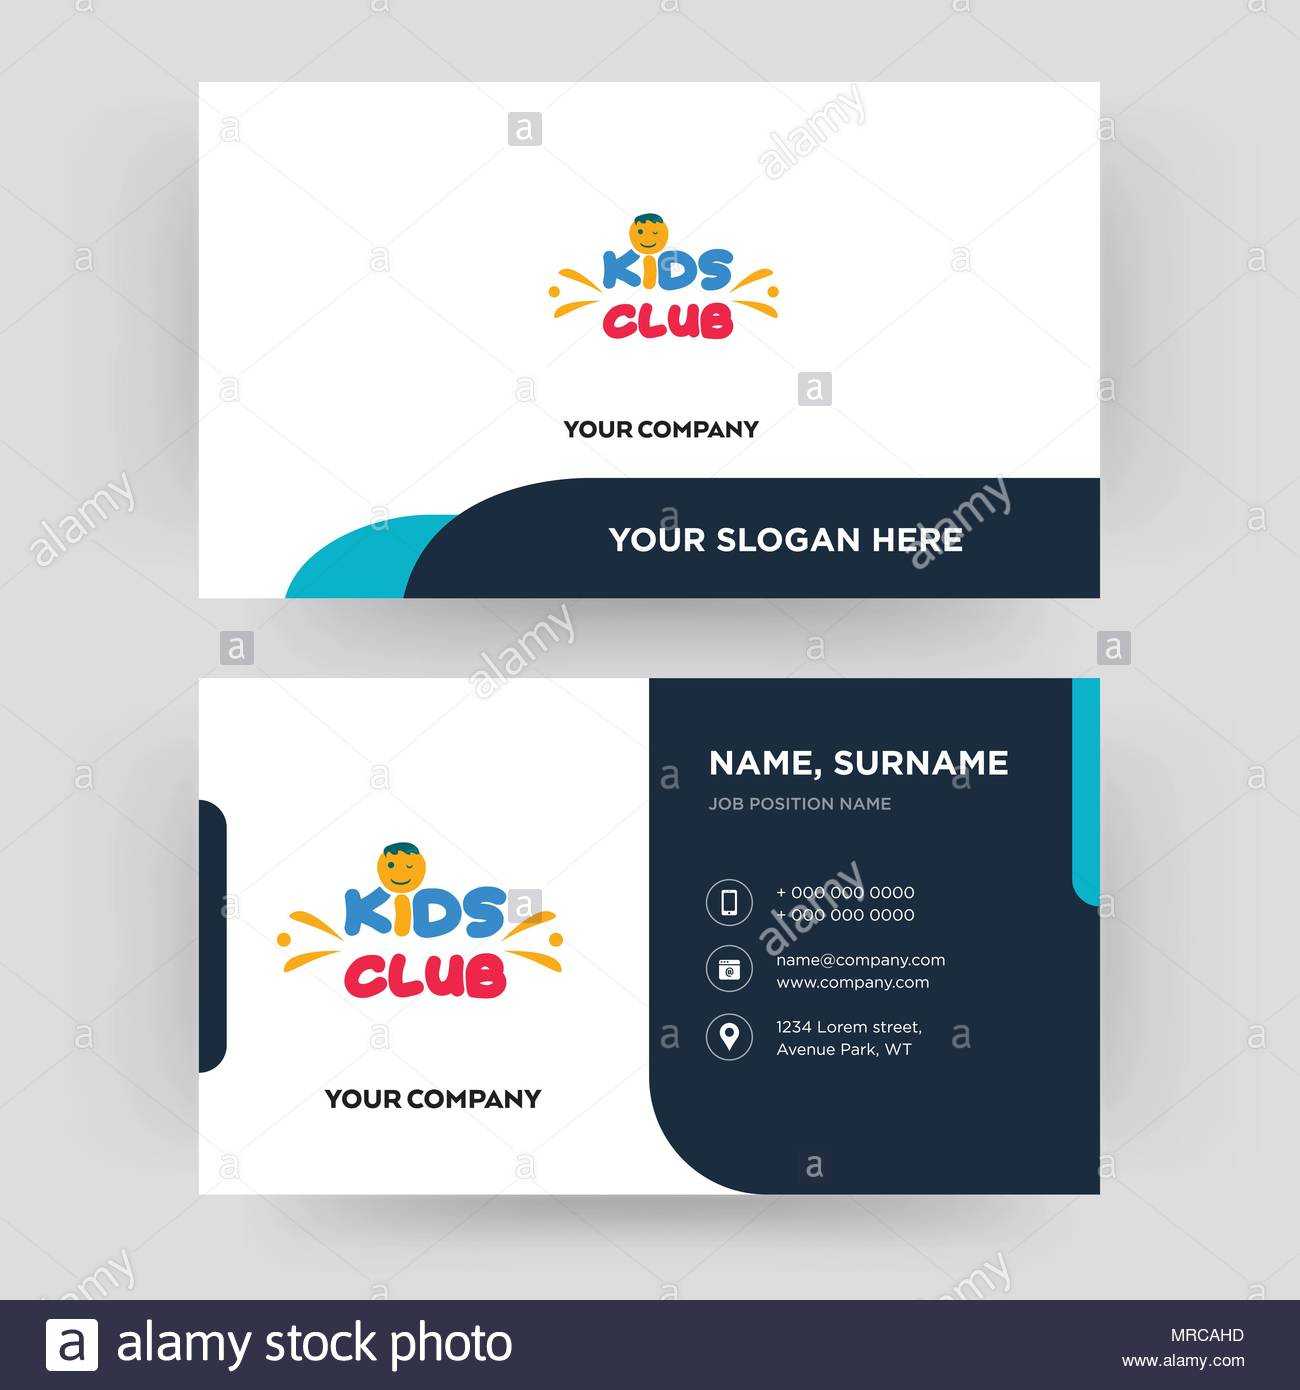 Kids Club, Business Card Design Template, Visiting For Your Within Id Card Template For Kids